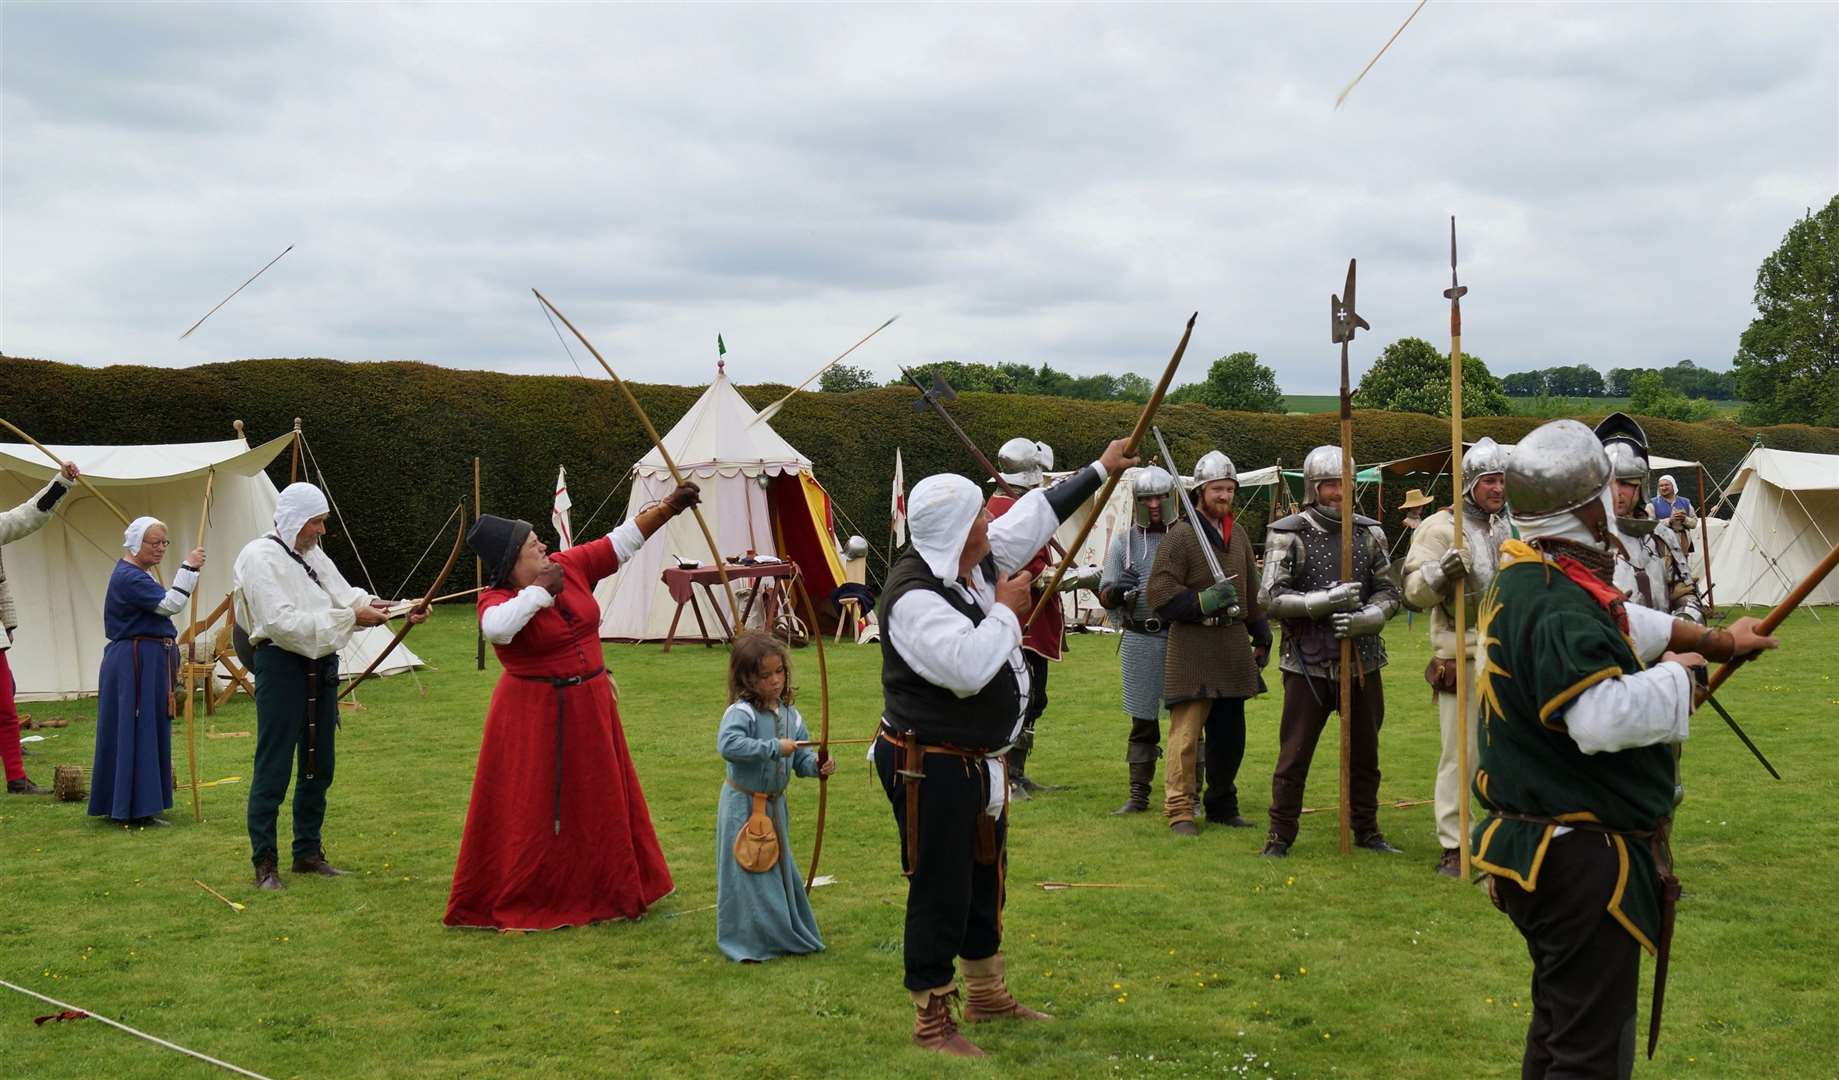 The Medieval Magic Weekend will have reenactments, mock battles and outdoor activities. Picture: Lullingstone Castle